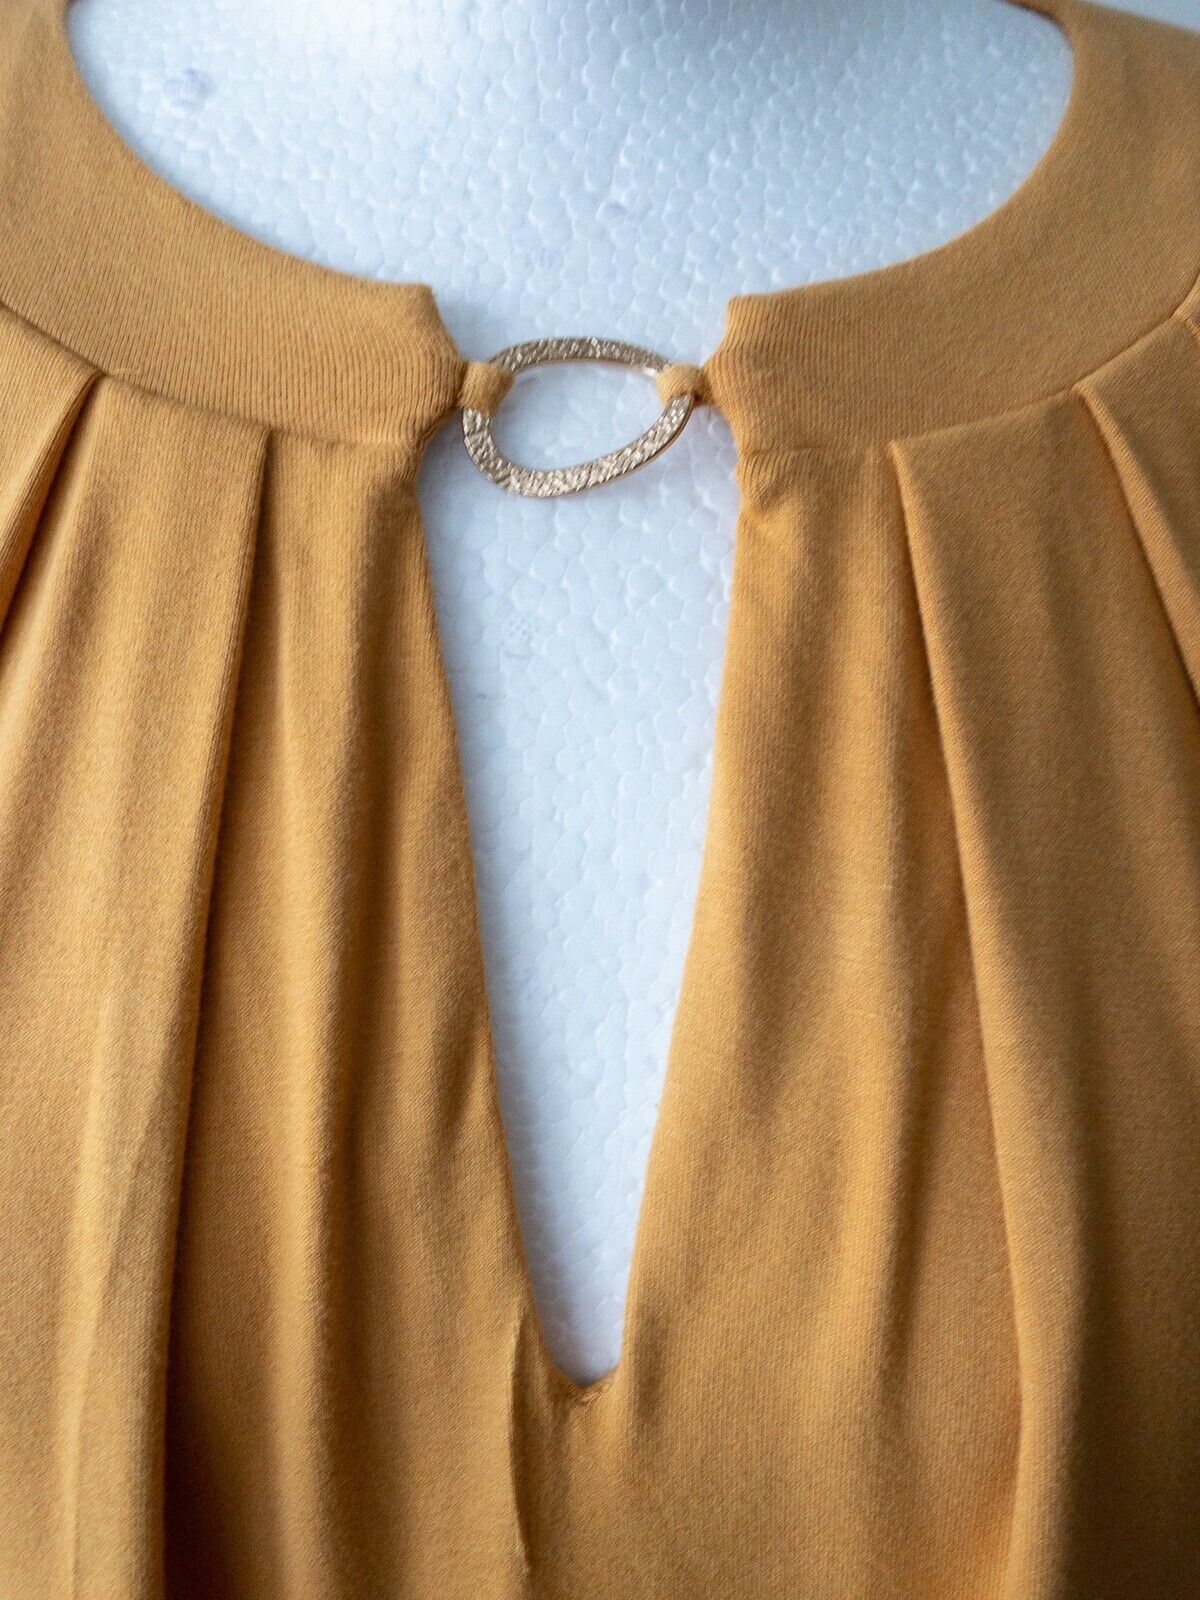 Mustard Yellow Flared Top Size 12